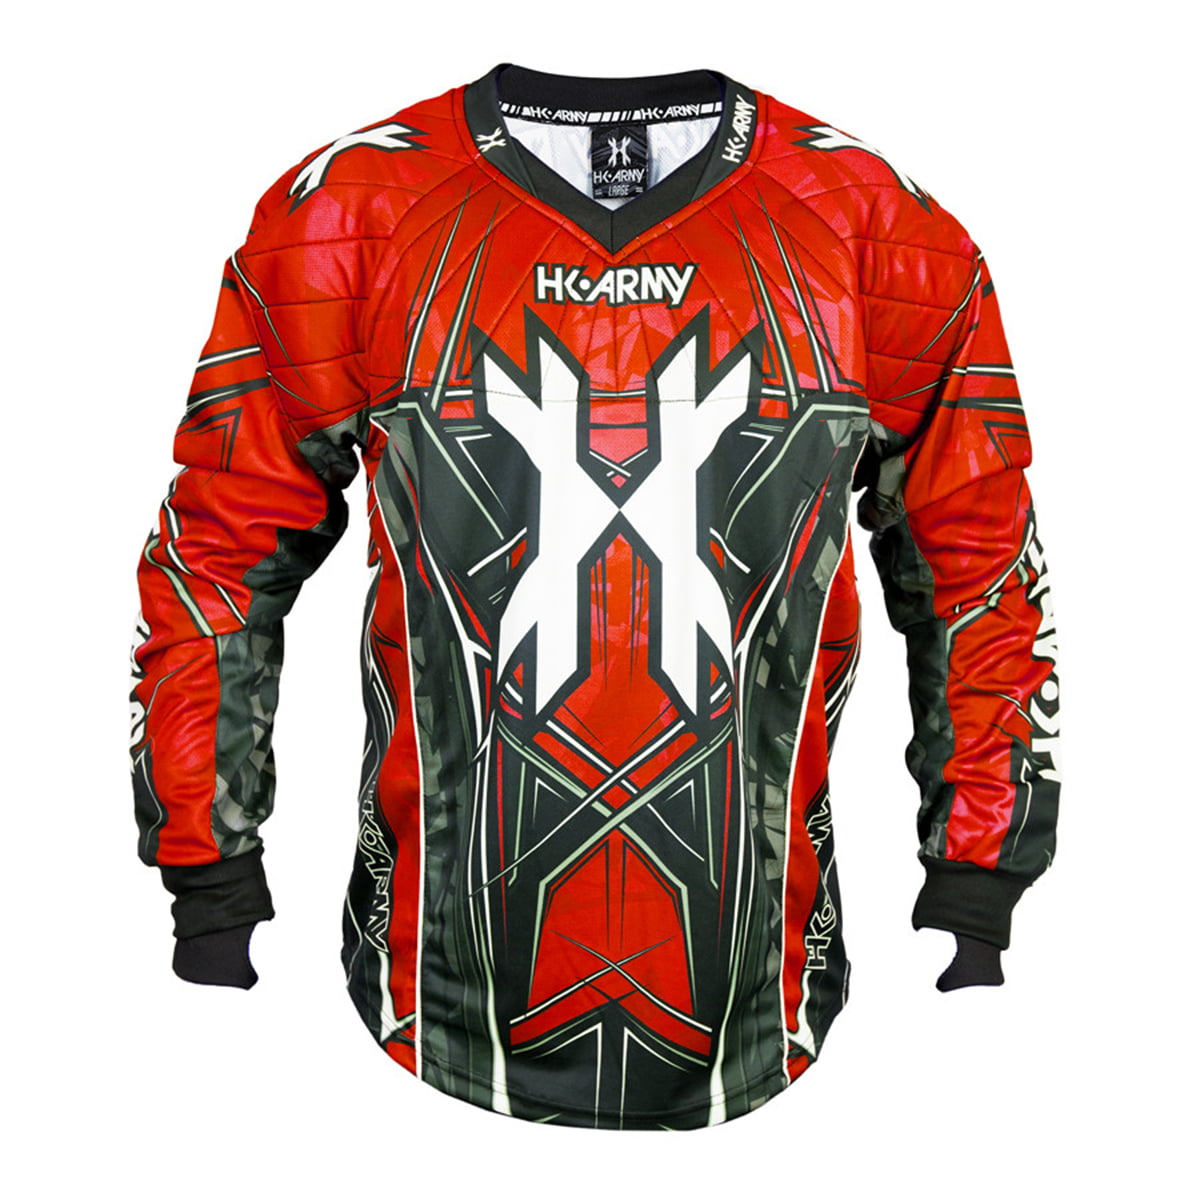 HK Army Paintball Freeline Free Line Playing Jersey Fire Red 2X-Large 2XL 